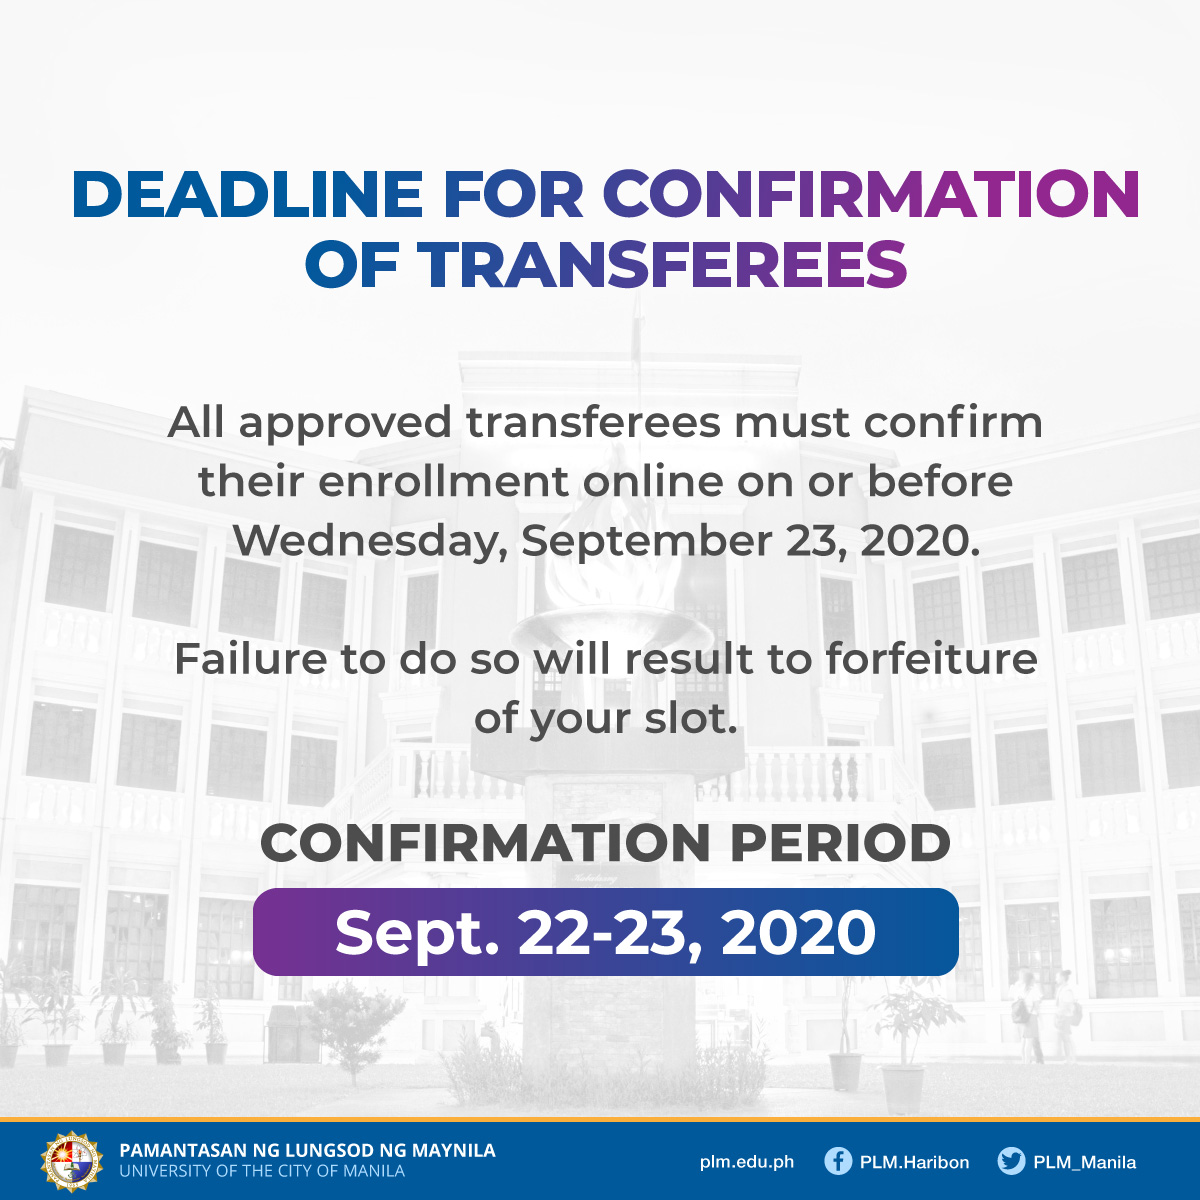 Approved transferees to confirm enrollment until Sept. 23, 2020